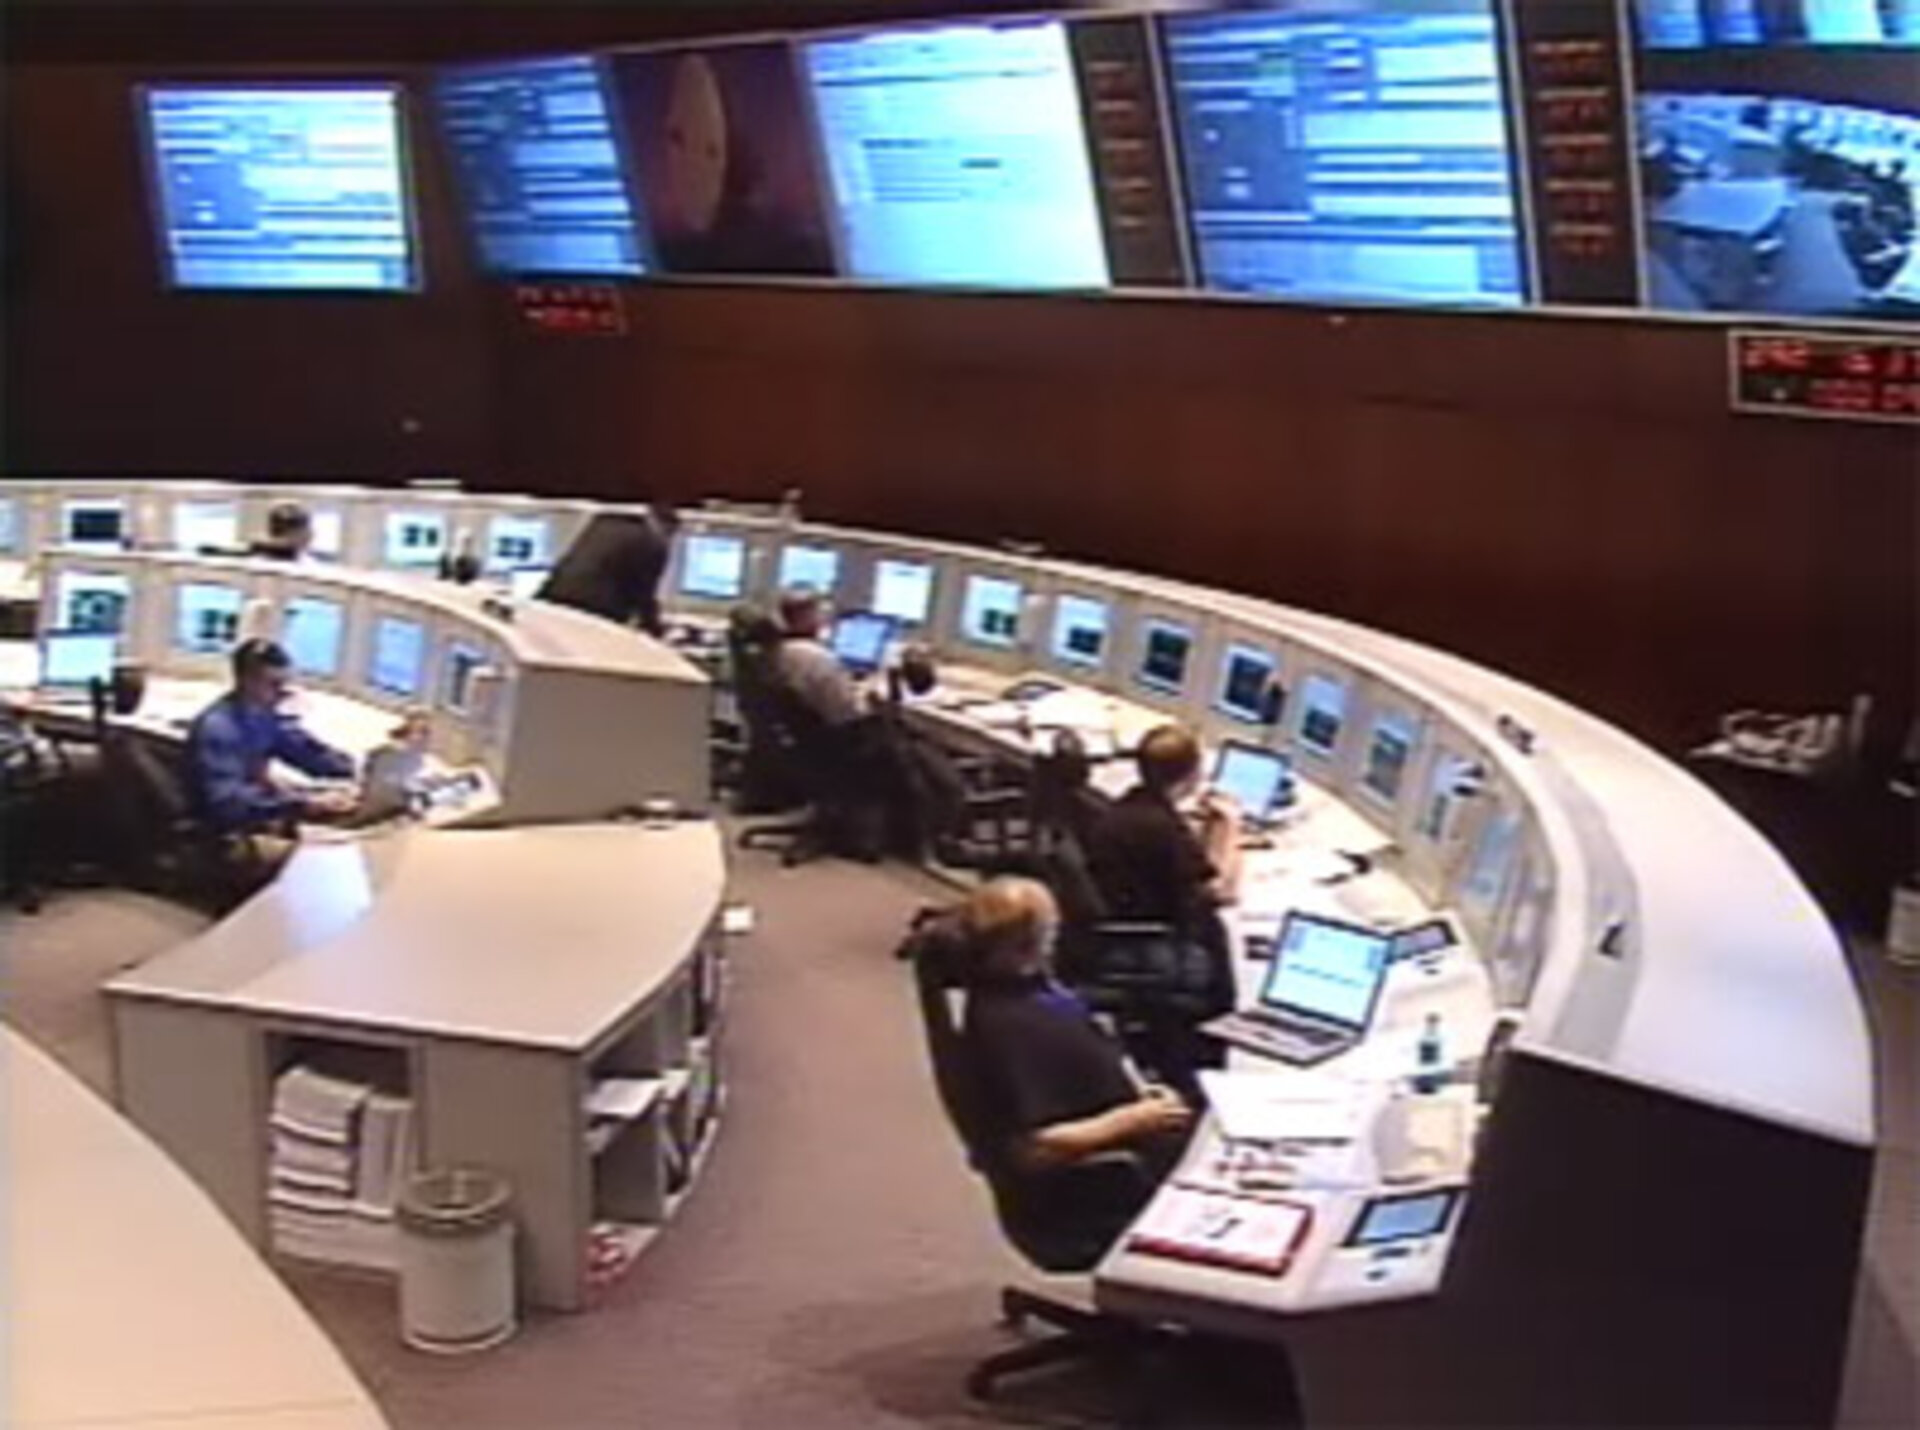 ESOC during MetOp launch